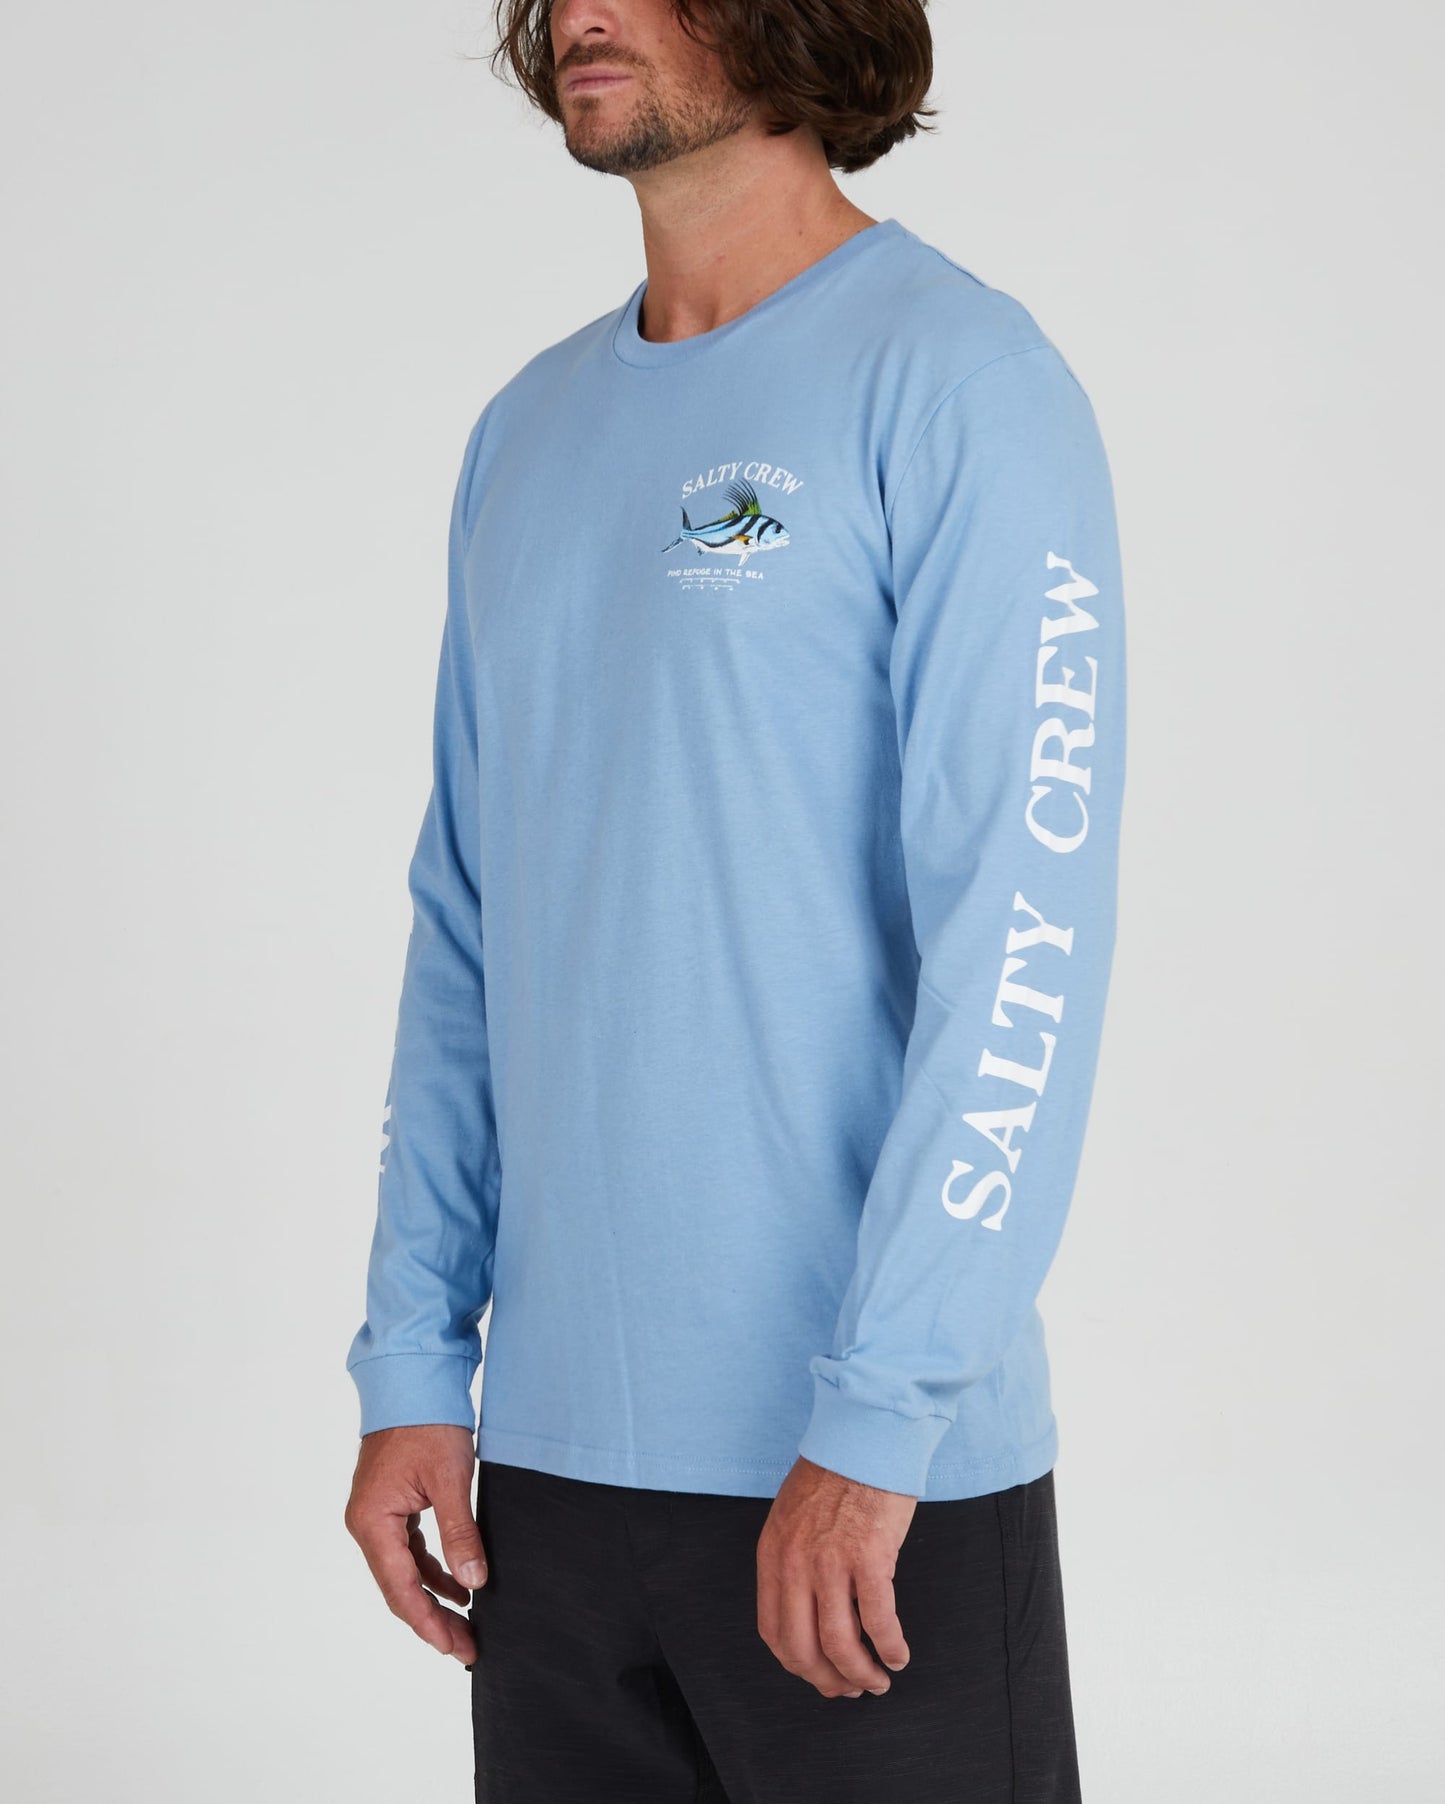 Salty crew T-SHIRTS L/S ROOSTER PREMIUM L/S TEE - MARINE BLUE in MARINE BLUE